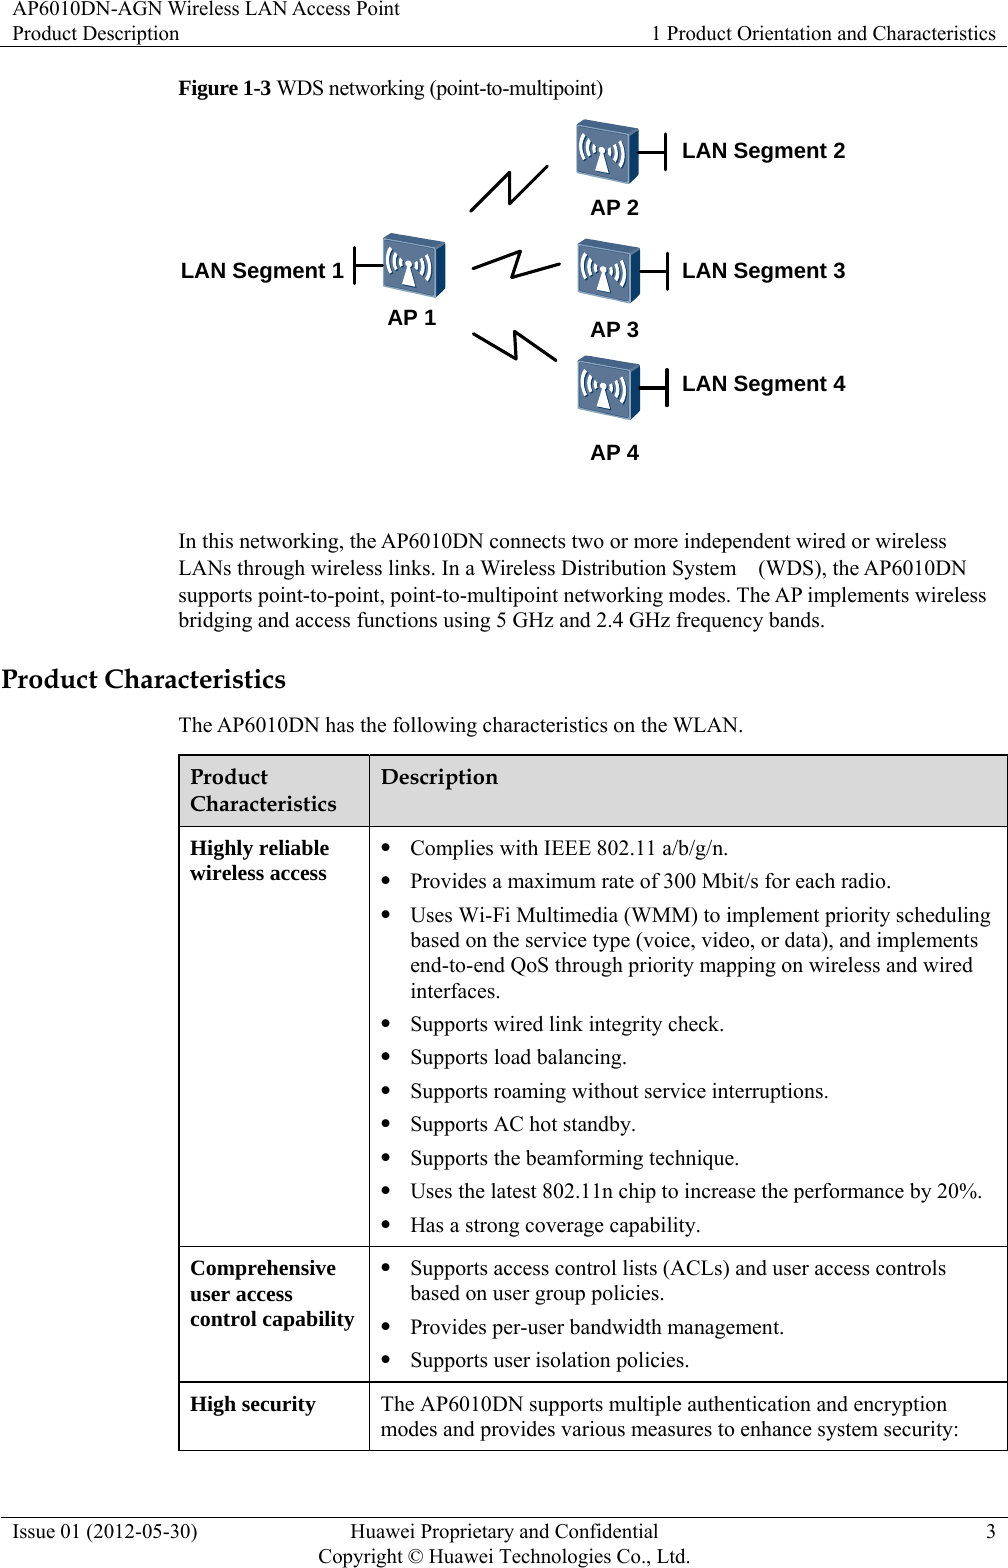 AP6010DN-AGN Wireless LAN Access Point Product Description  1 Product Orientation and Characteristics Issue 01 (2012-05-30)  Huawei Proprietary and Confidential         Copyright © Huawei Technologies Co., Ltd.3 Figure 1-3 WDS networking (point-to-multipoint) AP 2 AP 1  AP 3AP 4LAN Segment 1LAN Segment 2LAN Segment 3LAN Segment 4  In this networking, the AP6010DN connects two or more independent wired or wireless LANs through wireless links. In a Wireless Distribution System (WDS), the AP6010DN supports point-to-point, point-to-multipoint networking modes. The AP implements wireless bridging and access functions using 5 GHz and 2.4 GHz frequency bands. Product Characteristics The AP6010DN has the following characteristics on the WLAN. Product Characteristics Description Highly reliable wireless access z Complies with IEEE 802.11 a/b/g/n. z Provides a maximum rate of 300 Mbit/s for each radio. z Uses Wi-Fi Multimedia (WMM) to implement priority scheduling based on the service type (voice, video, or data), and implements end-to-end QoS through priority mapping on wireless and wired interfaces. z Supports wired link integrity check. z Supports load balancing. z Supports roaming without service interruptions. z Supports AC hot standby. z Supports the beamforming technique. z Uses the latest 802.11n chip to increase the performance by 20%. z Has a strong coverage capability. Comprehensive user access control capability z Supports access control lists (ACLs) and user access controls based on user group policies. z Provides per-user bandwidth management. z Supports user isolation policies. High security The AP6010DN supports multiple authentication and encryption modes and provides various measures to enhance system security: 